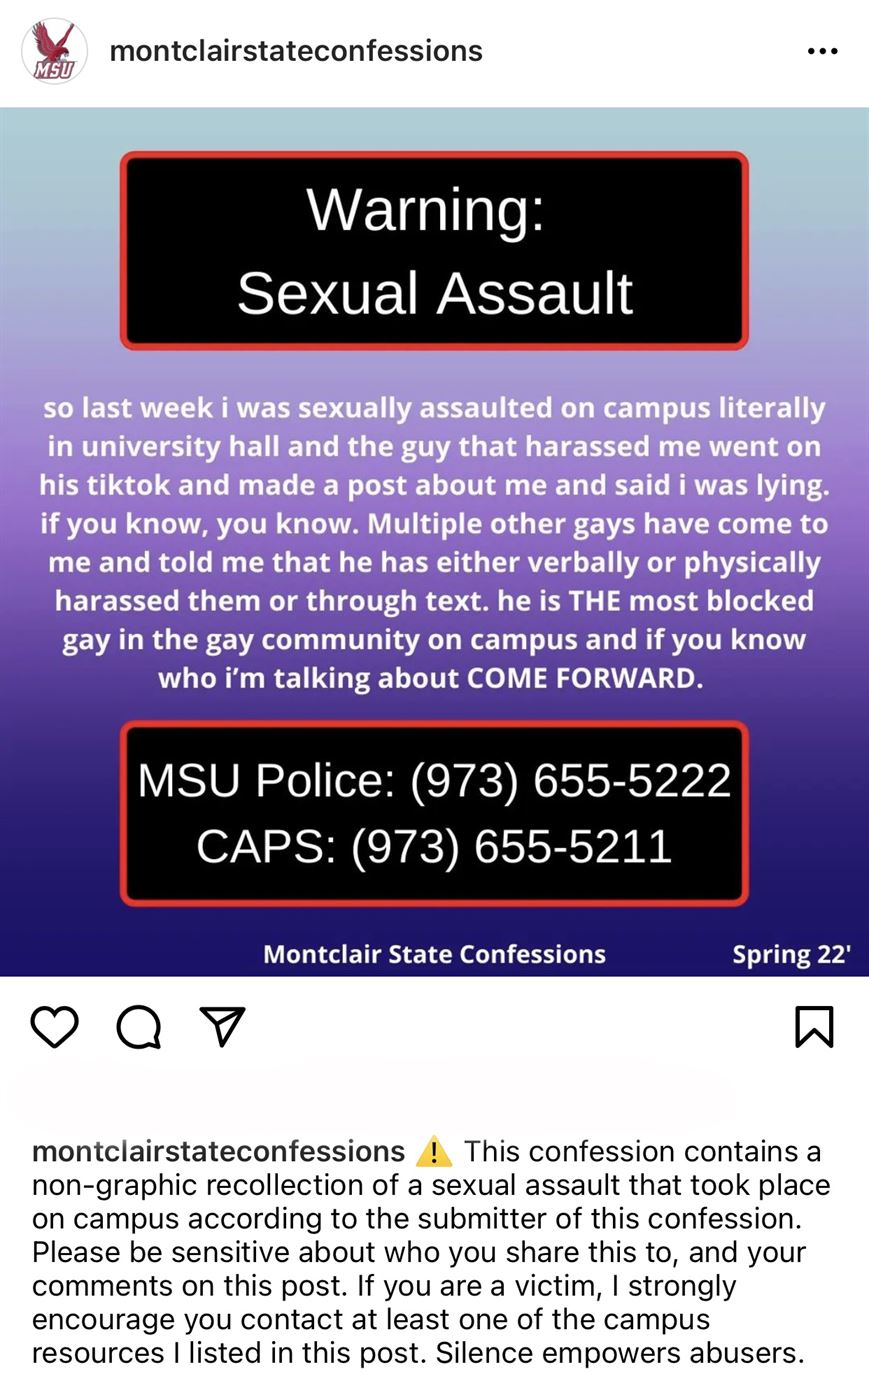 An anonymous post on @montclairstateconfessions spread awareness and sparked frustration.